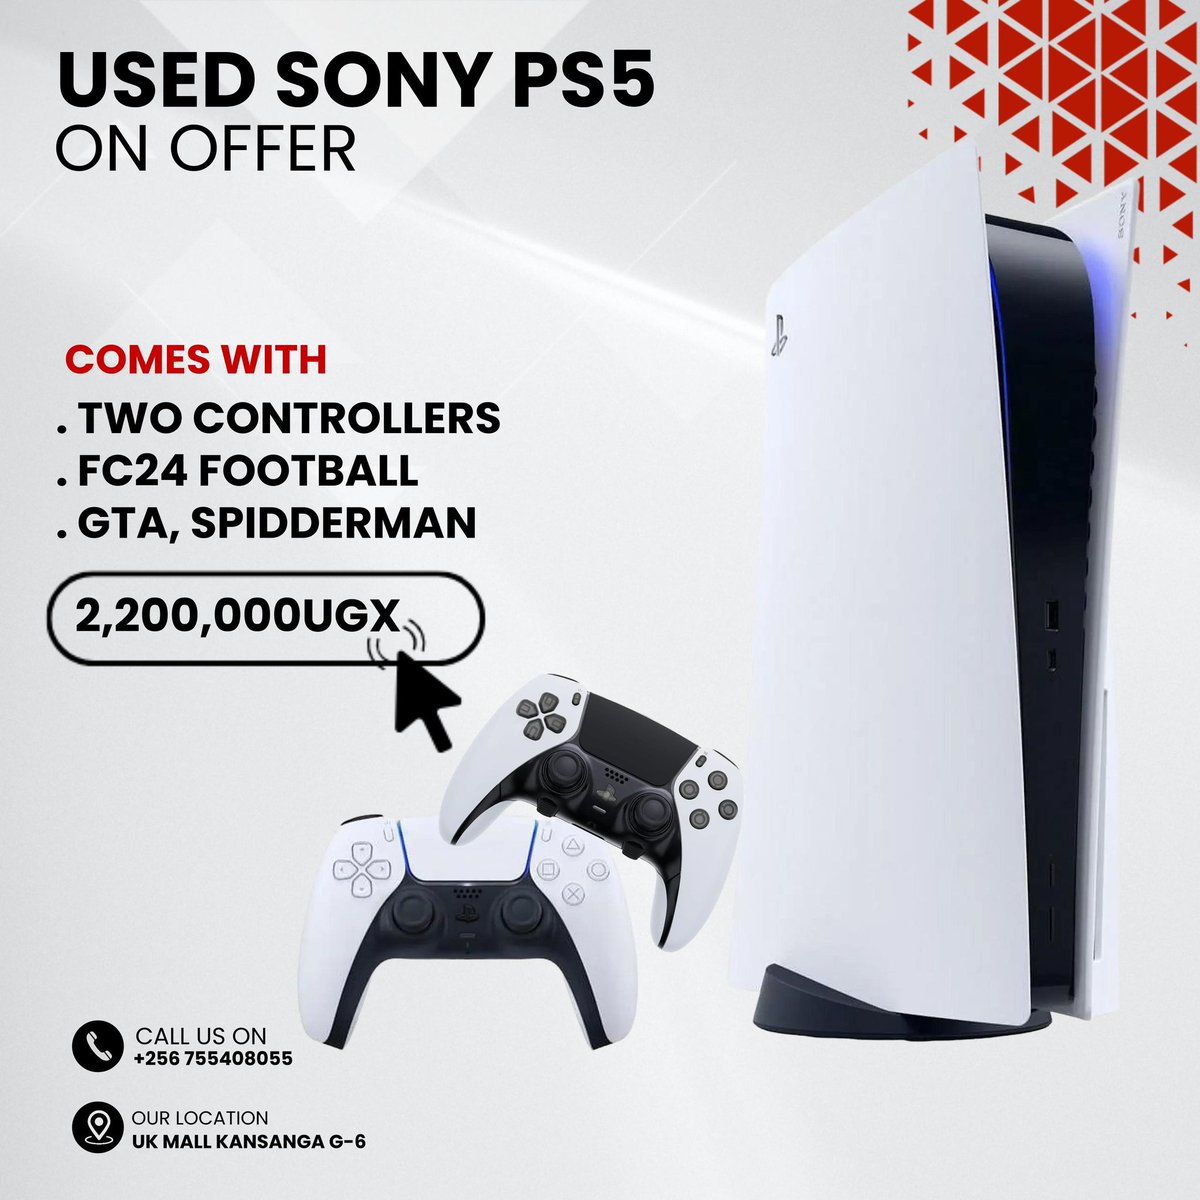 Used Sony PS5 on offer, it comes with two controllers, FC24 football, GTA, Spidderman at Ugx 2,200,000/= ☎️ 0755408055 #legendsaccessories